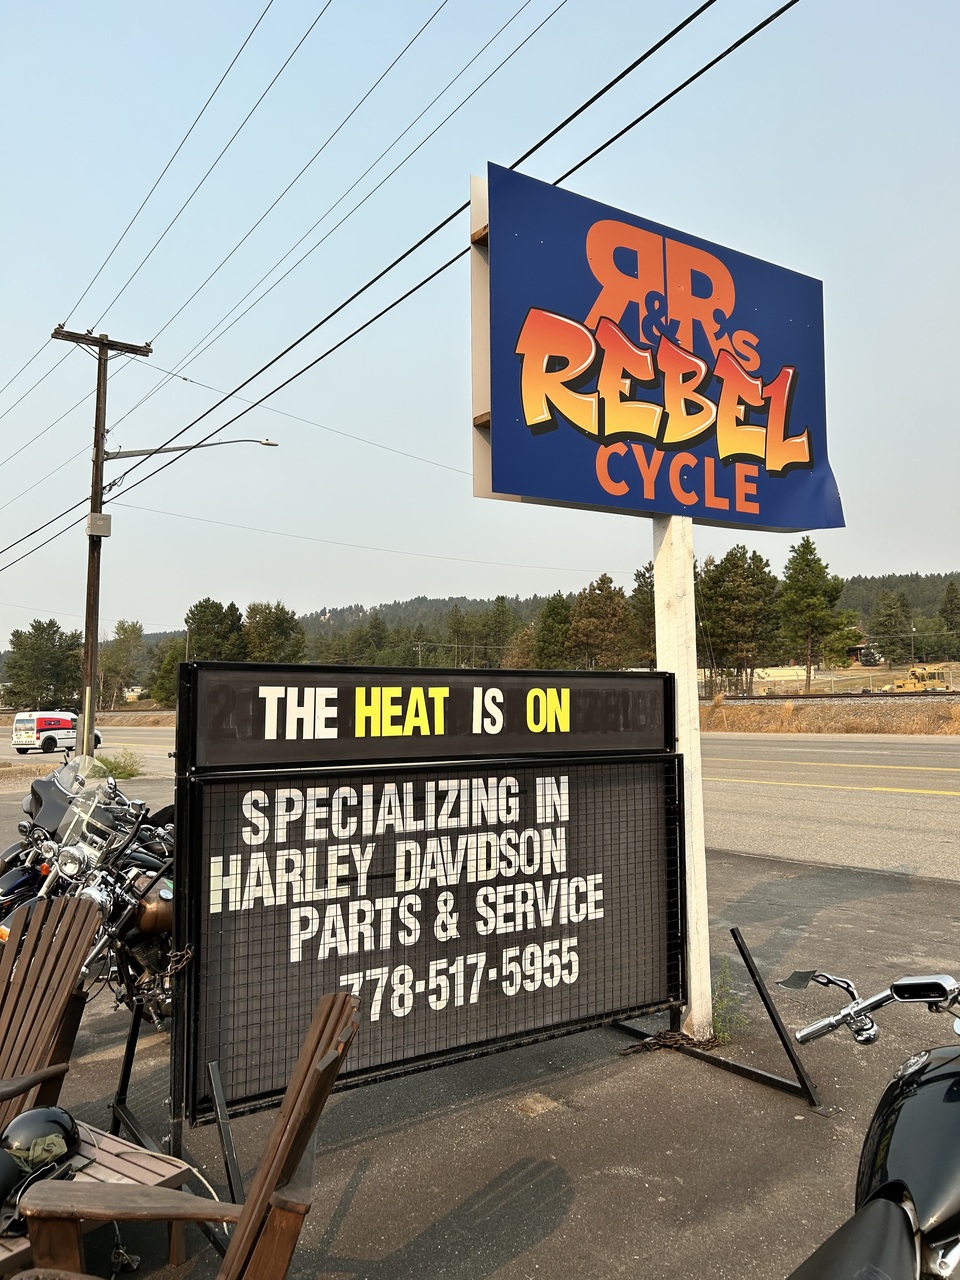 Wanted to give a shout out to REBEL Cycle in Cranbrook, BC. Great service for all makes! Needed a back tire on our ride and didn’t want to hold up the group! Fastest tire change ever!